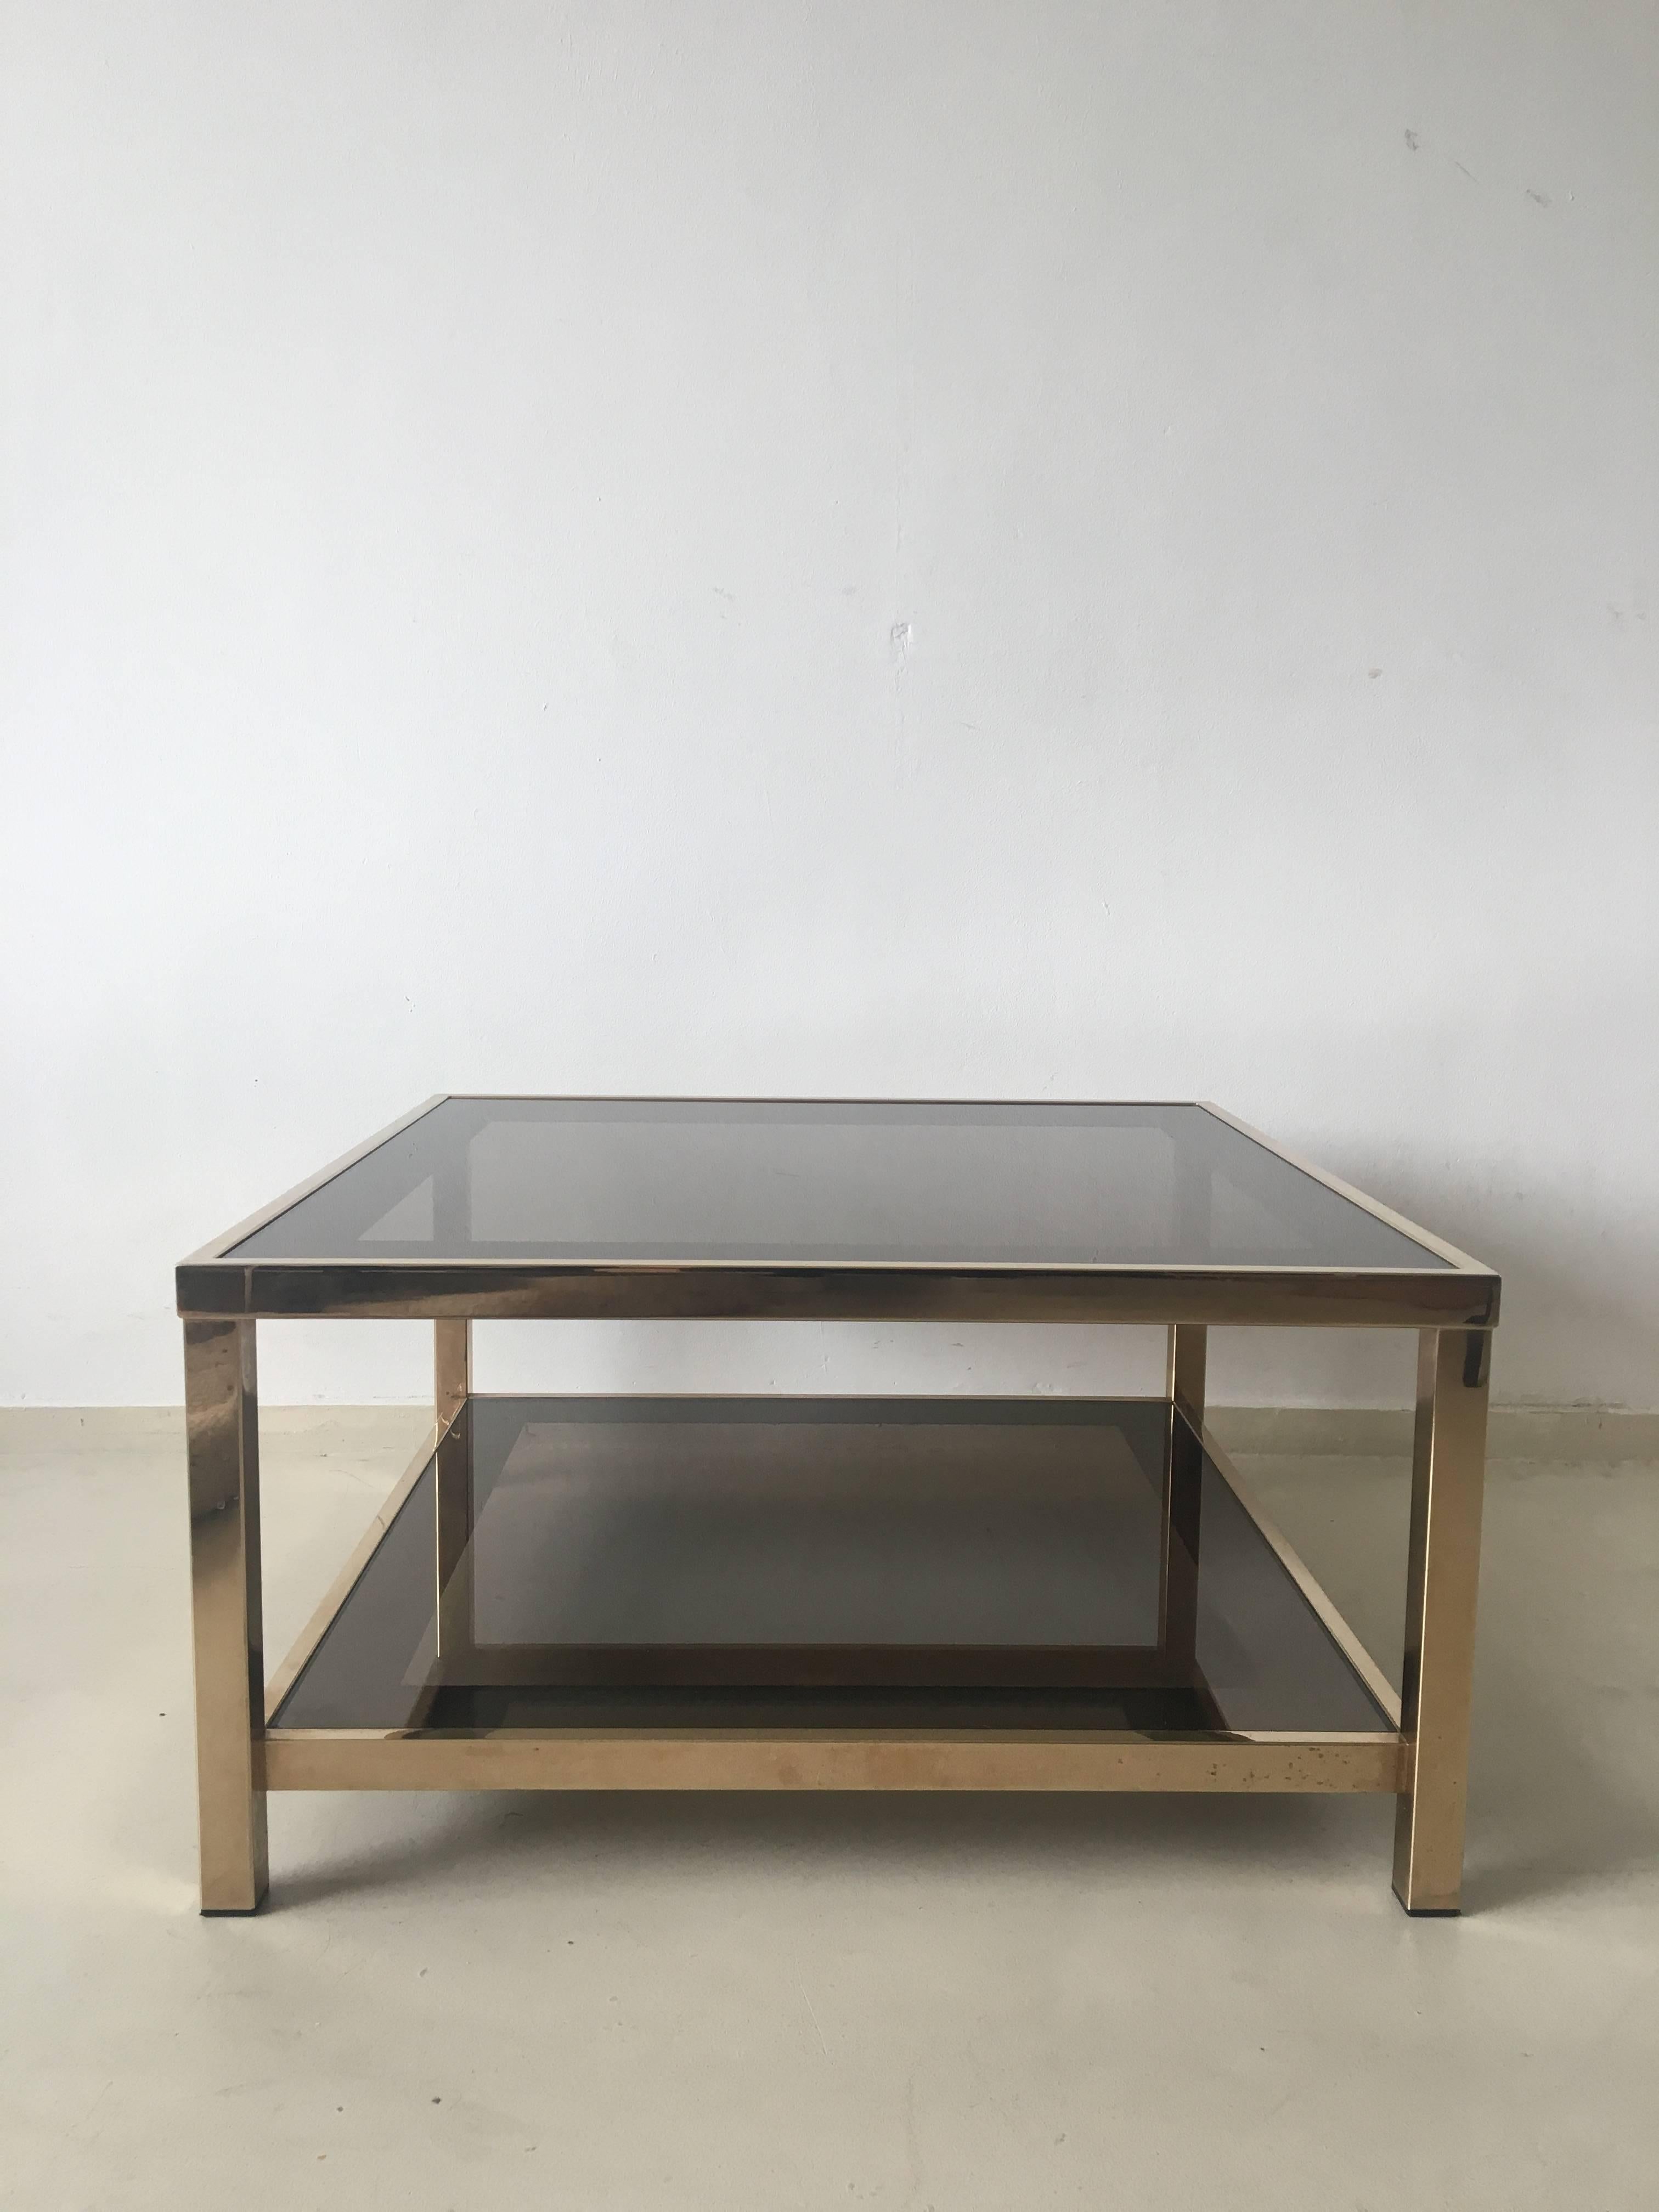 This exclusive two-tiered table was designed with a gold-plated metal frame and wonderful mirrored borders in the glass. It remains in a good vintage condition with wear consistent with age and use. The table is marked with a certificate.